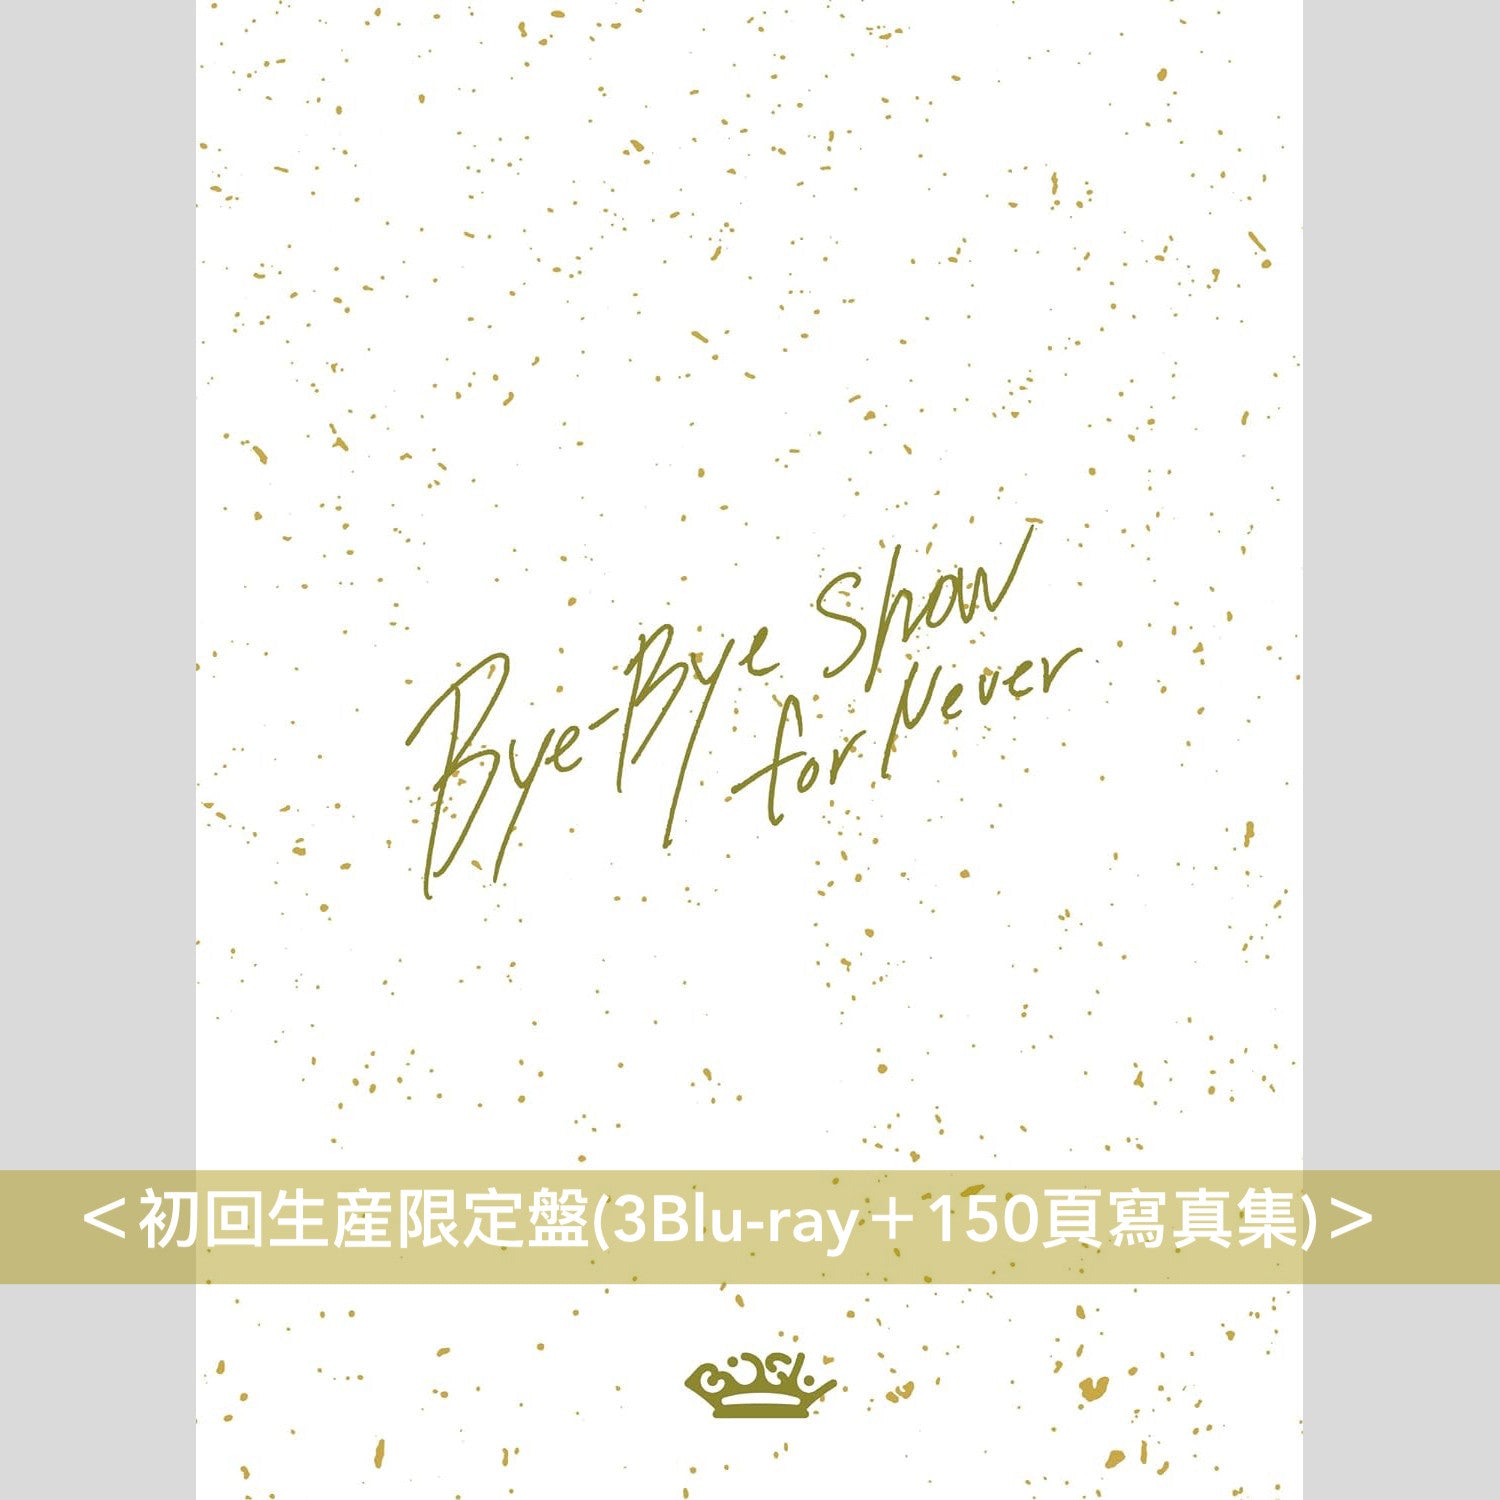 BiSH 解散Live Blu-ray《Bye-Bye Show for Never at TOKYO DOME 